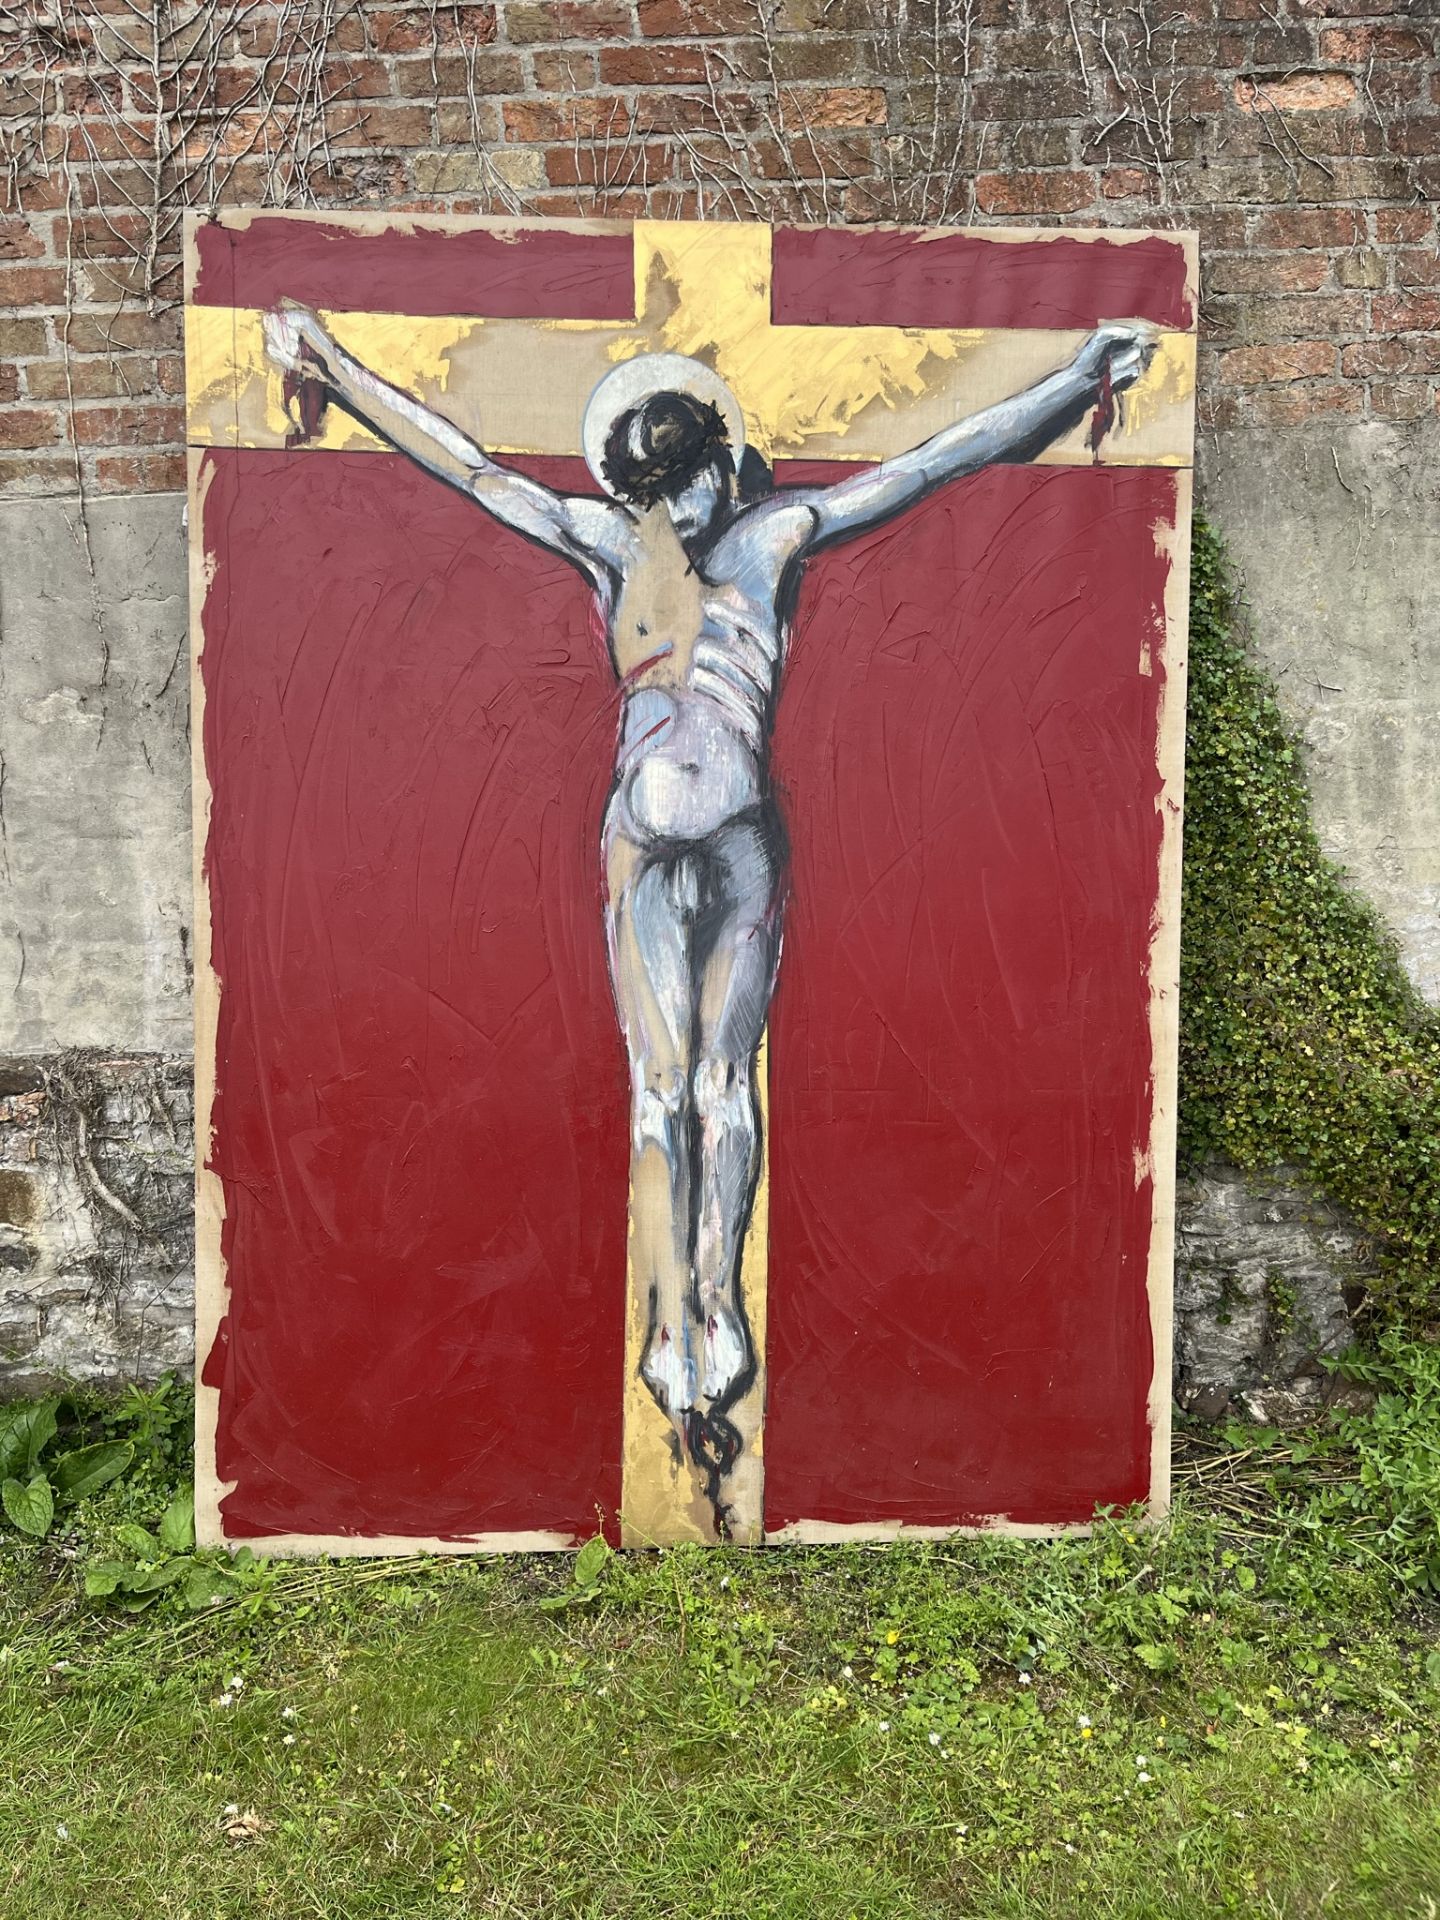 Peter Denmark (1950-2014) Acrylic on canvas "Crucifixion" 182cm wide by 248cm high Provenance, the - Image 2 of 2